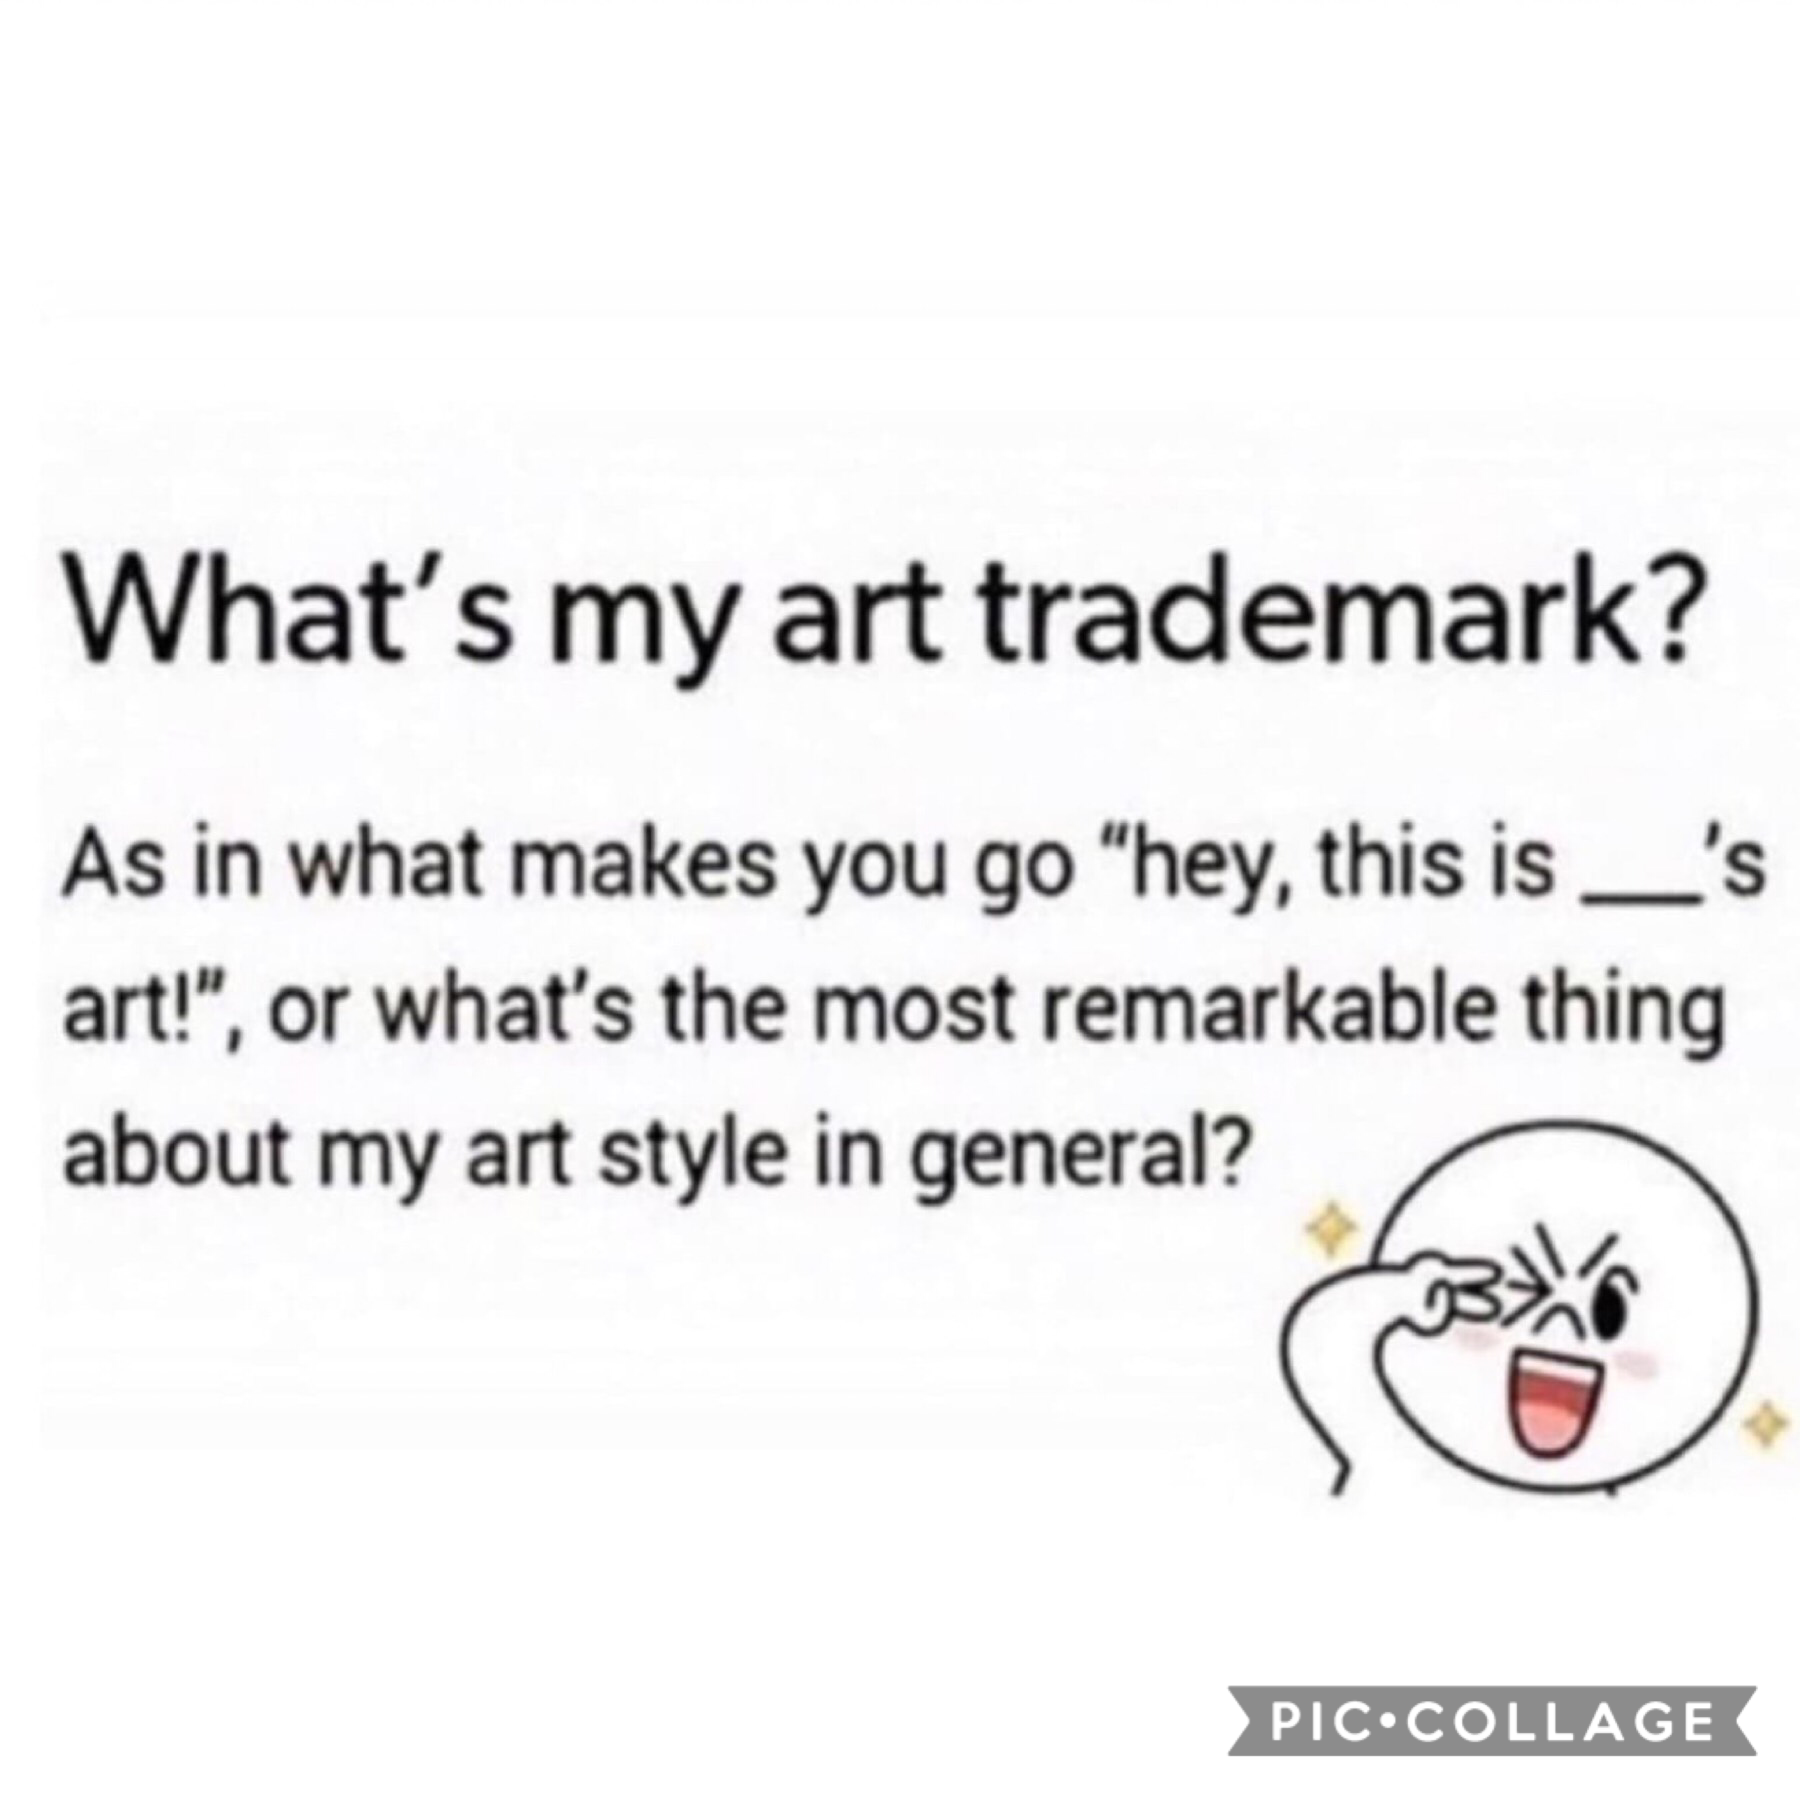 Oof stolen, and y’all probably already know my trademark 